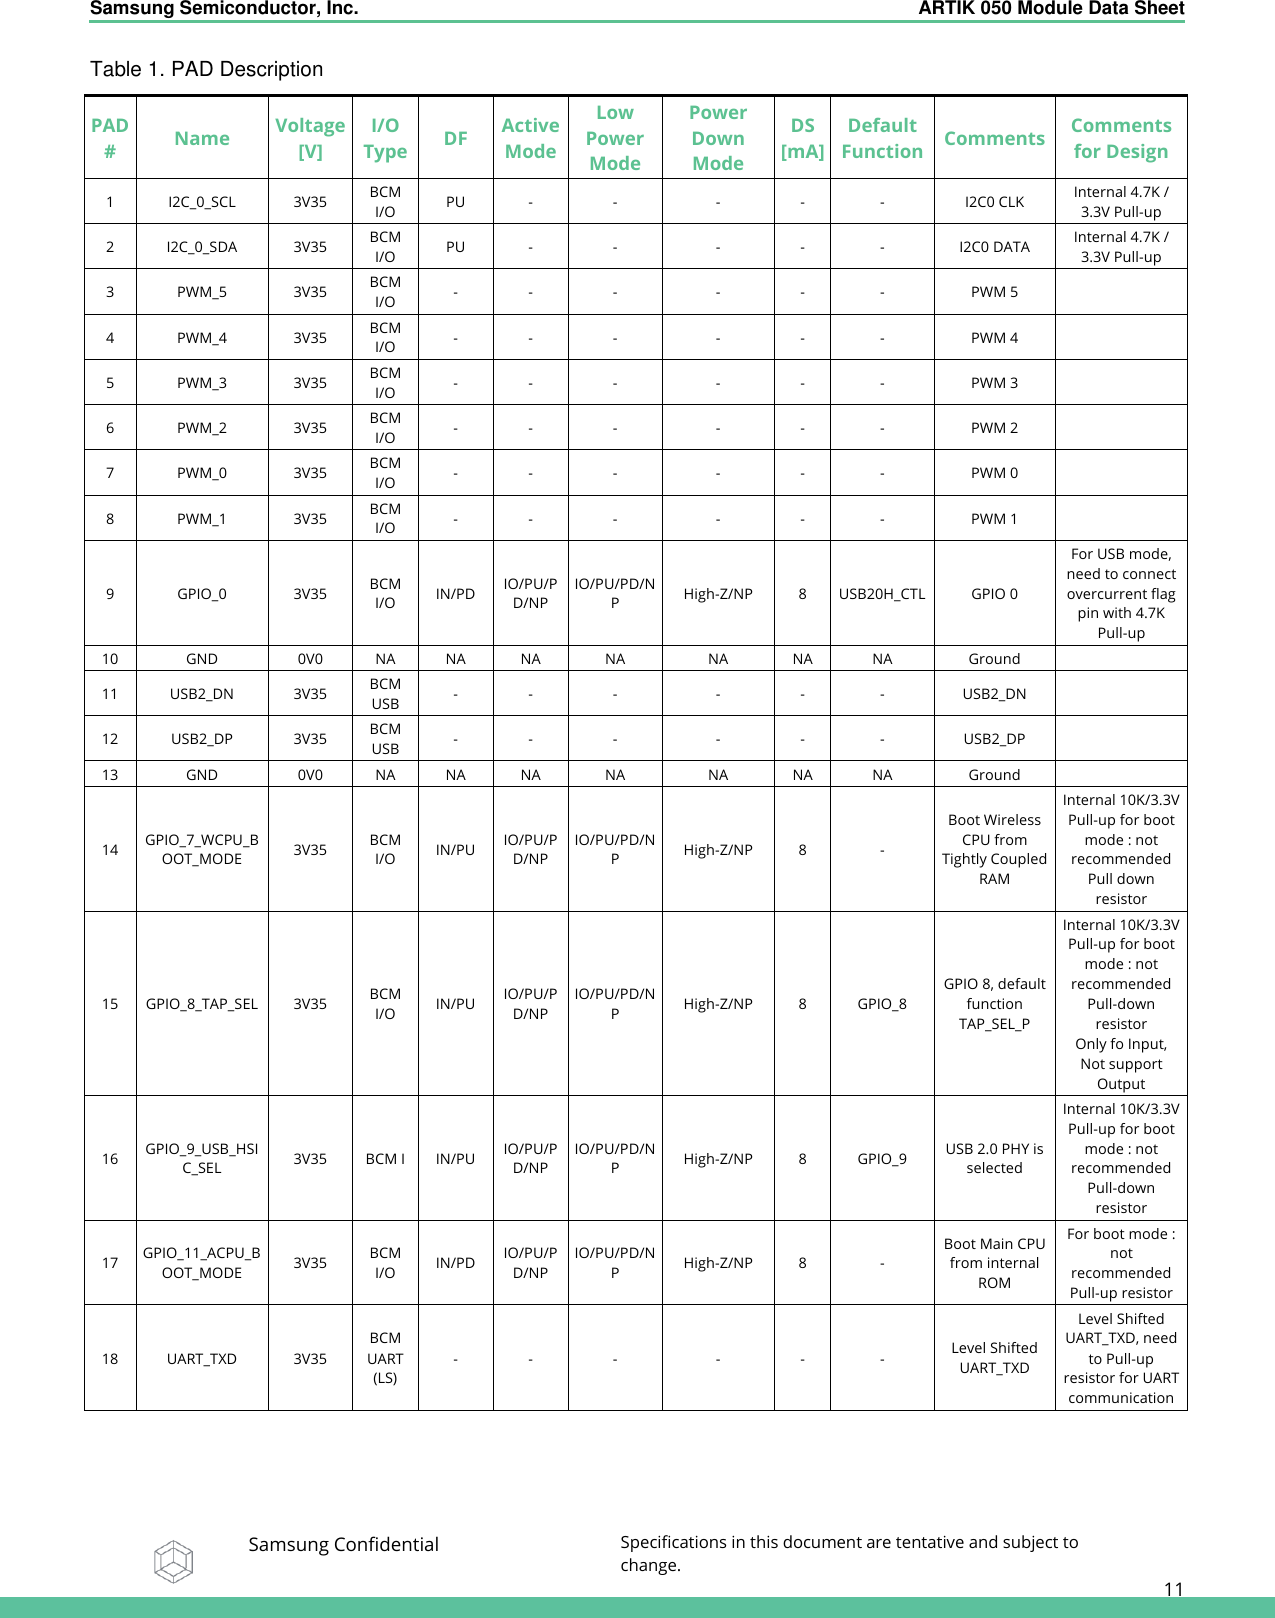 Samsung Semiconductor, Inc.  ARTIK 050 Module Data Sheet   Samsung Confidential Specifications in this document are tentative and subject to change.  11 Table 1. PAD Description PAD# Name Voltage [V] I/O Type DF Active Mode Low Power Mode Power Down Mode DS [mA] Default Function Comments Comments for Design 1 I2C_0_SCL 3V35 BCM I/O PU - - - - - I2C0 CLK Internal 4.7K / 3.3V Pull-up 2 I2C_0_SDA 3V35 BCM I/O PU - - - - - I2C0 DATA Internal 4.7K / 3.3V Pull-up 3 PWM_5 3V35 BCM I/O - - - - - - PWM 5  4 PWM_4 3V35 BCM I/O - - - - - - PWM 4  5 PWM_3 3V35 BCM I/O - - - - - - PWM 3  6 PWM_2 3V35 BCM I/O - - - - - - PWM 2  7 PWM_0 3V35 BCM I/O - - - - - - PWM 0  8 PWM_1 3V35 BCM I/O - - - - - - PWM 1  9 GPIO_0 3V35 BCM I/O IN/PD IO/PU/PD/NP IO/PU/PD/NP High-Z/NP 8 USB20H_CTL GPIO 0 For USB mode, need to connect overcurrent flag pin with 4.7K Pull-up 10 GND 0V0 NA NA NA NA NA NA NA Ground  11 USB2_DN 3V35 BCM USB - - - - - - USB2_DN  12 USB2_DP 3V35 BCM USB - - - - - - USB2_DP  13 GND 0V0 NA NA NA NA NA NA NA Ground  14 GPIO_7_WCPU_BOOT_MODE 3V35 BCM I/O IN/PU IO/PU/PD/NP IO/PU/PD/NP High-Z/NP 8 - Boot Wireless CPU from Tightly Coupled RAM Internal 10K/3.3V Pull-up for boot mode : not recommended  Pull down resistor 15 GPIO_8_TAP_SEL 3V35 BCM I/O IN/PU IO/PU/PD/NP IO/PU/PD/NP High-Z/NP 8 GPIO_8 GPIO 8, default function TAP_SEL_P Internal 10K/3.3V Pull-up for boot mode : not recommended  Pull-down resistor Only fo Input, Not support Output 16 GPIO_9_USB_HSIC_SEL 3V35 BCM I IN/PU IO/PU/PD/NP IO/PU/PD/NP High-Z/NP 8 GPIO_9 USB 2.0 PHY is selected Internal 10K/3.3V Pull-up for boot mode : not recommended  Pull-down resistor 17 GPIO_11_ACPU_BOOT_MODE 3V35 BCM I/O IN/PD IO/PU/PD/NP IO/PU/PD/NP High-Z/NP 8 - Boot Main CPU from internal ROM For boot mode : not recommended  Pull-up resistor 18 UART_TXD 3V35 BCM UART (LS) - - - - - - Level Shifted UART_TXD Level Shifted UART_TXD, need to Pull-up resistor for UART communication 